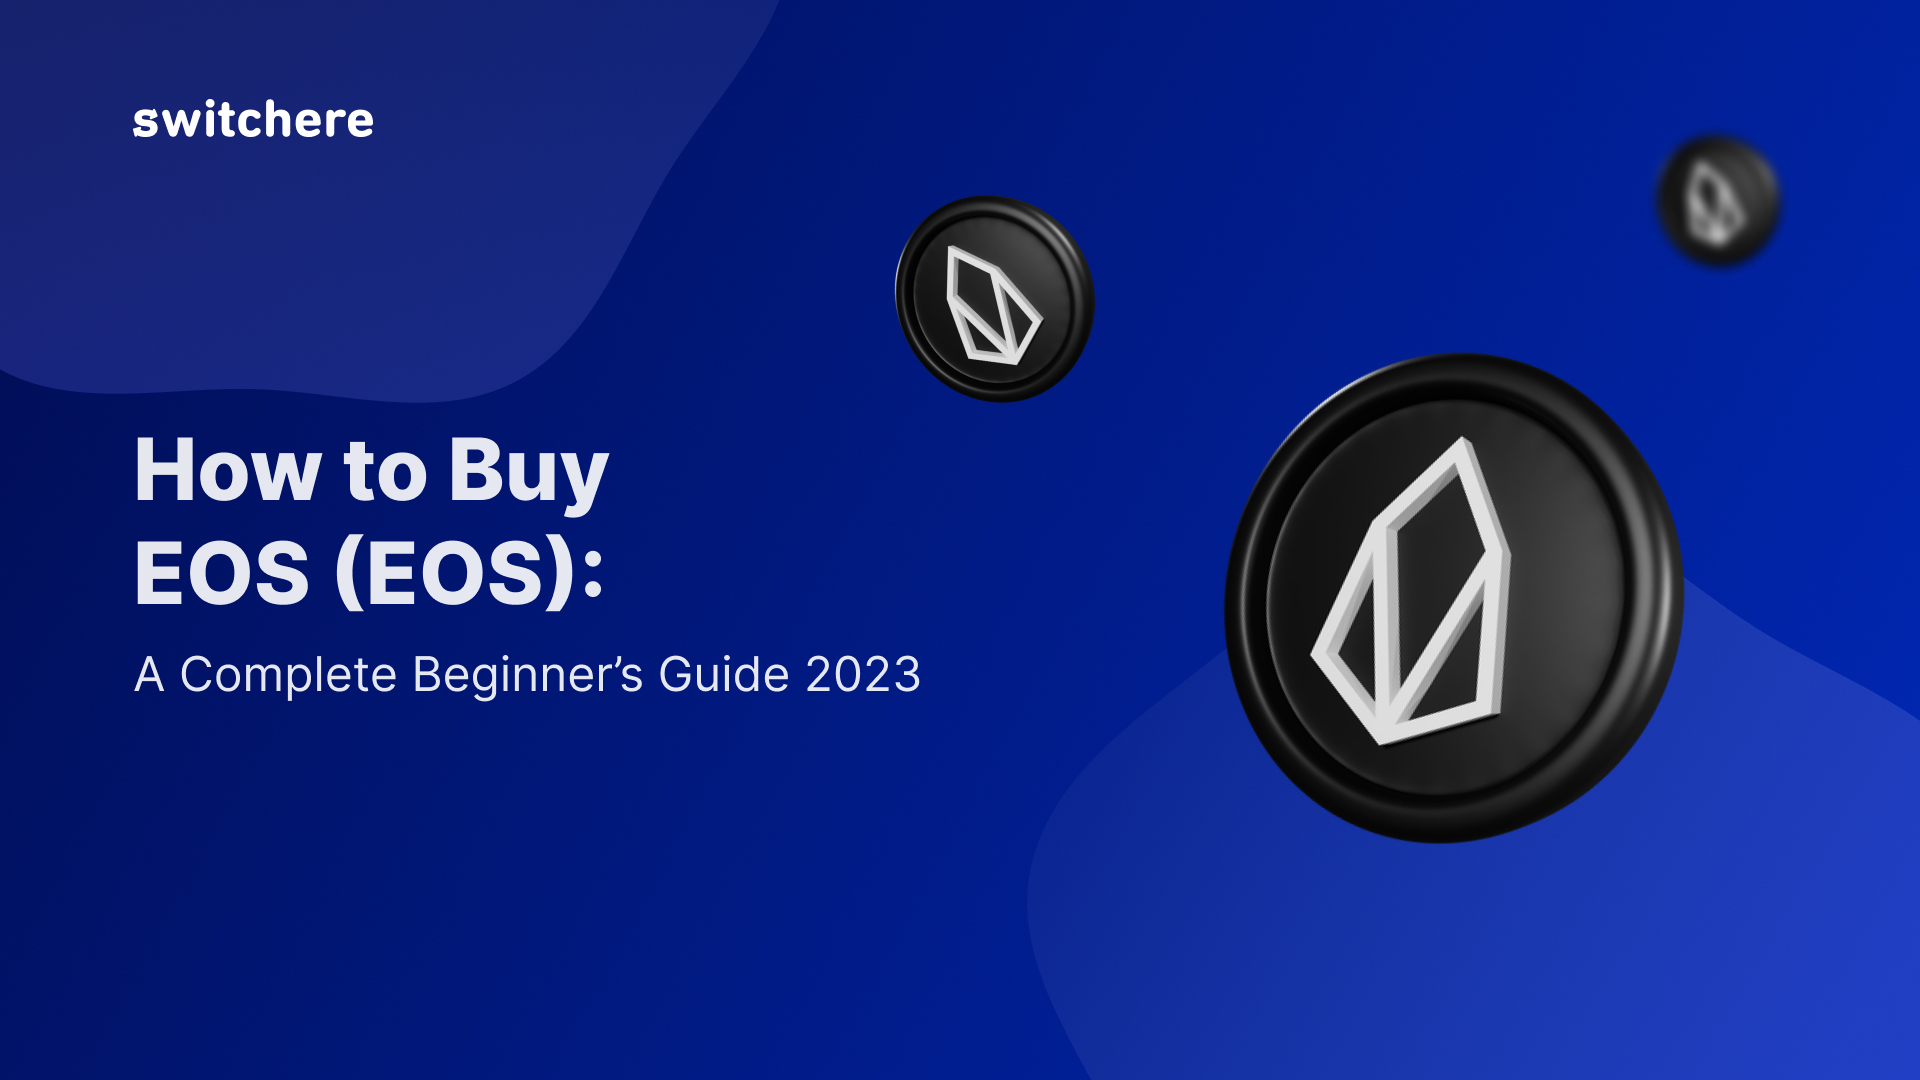 How to Buy EOS (EOS): A Complete Beginner’s Guide 2023